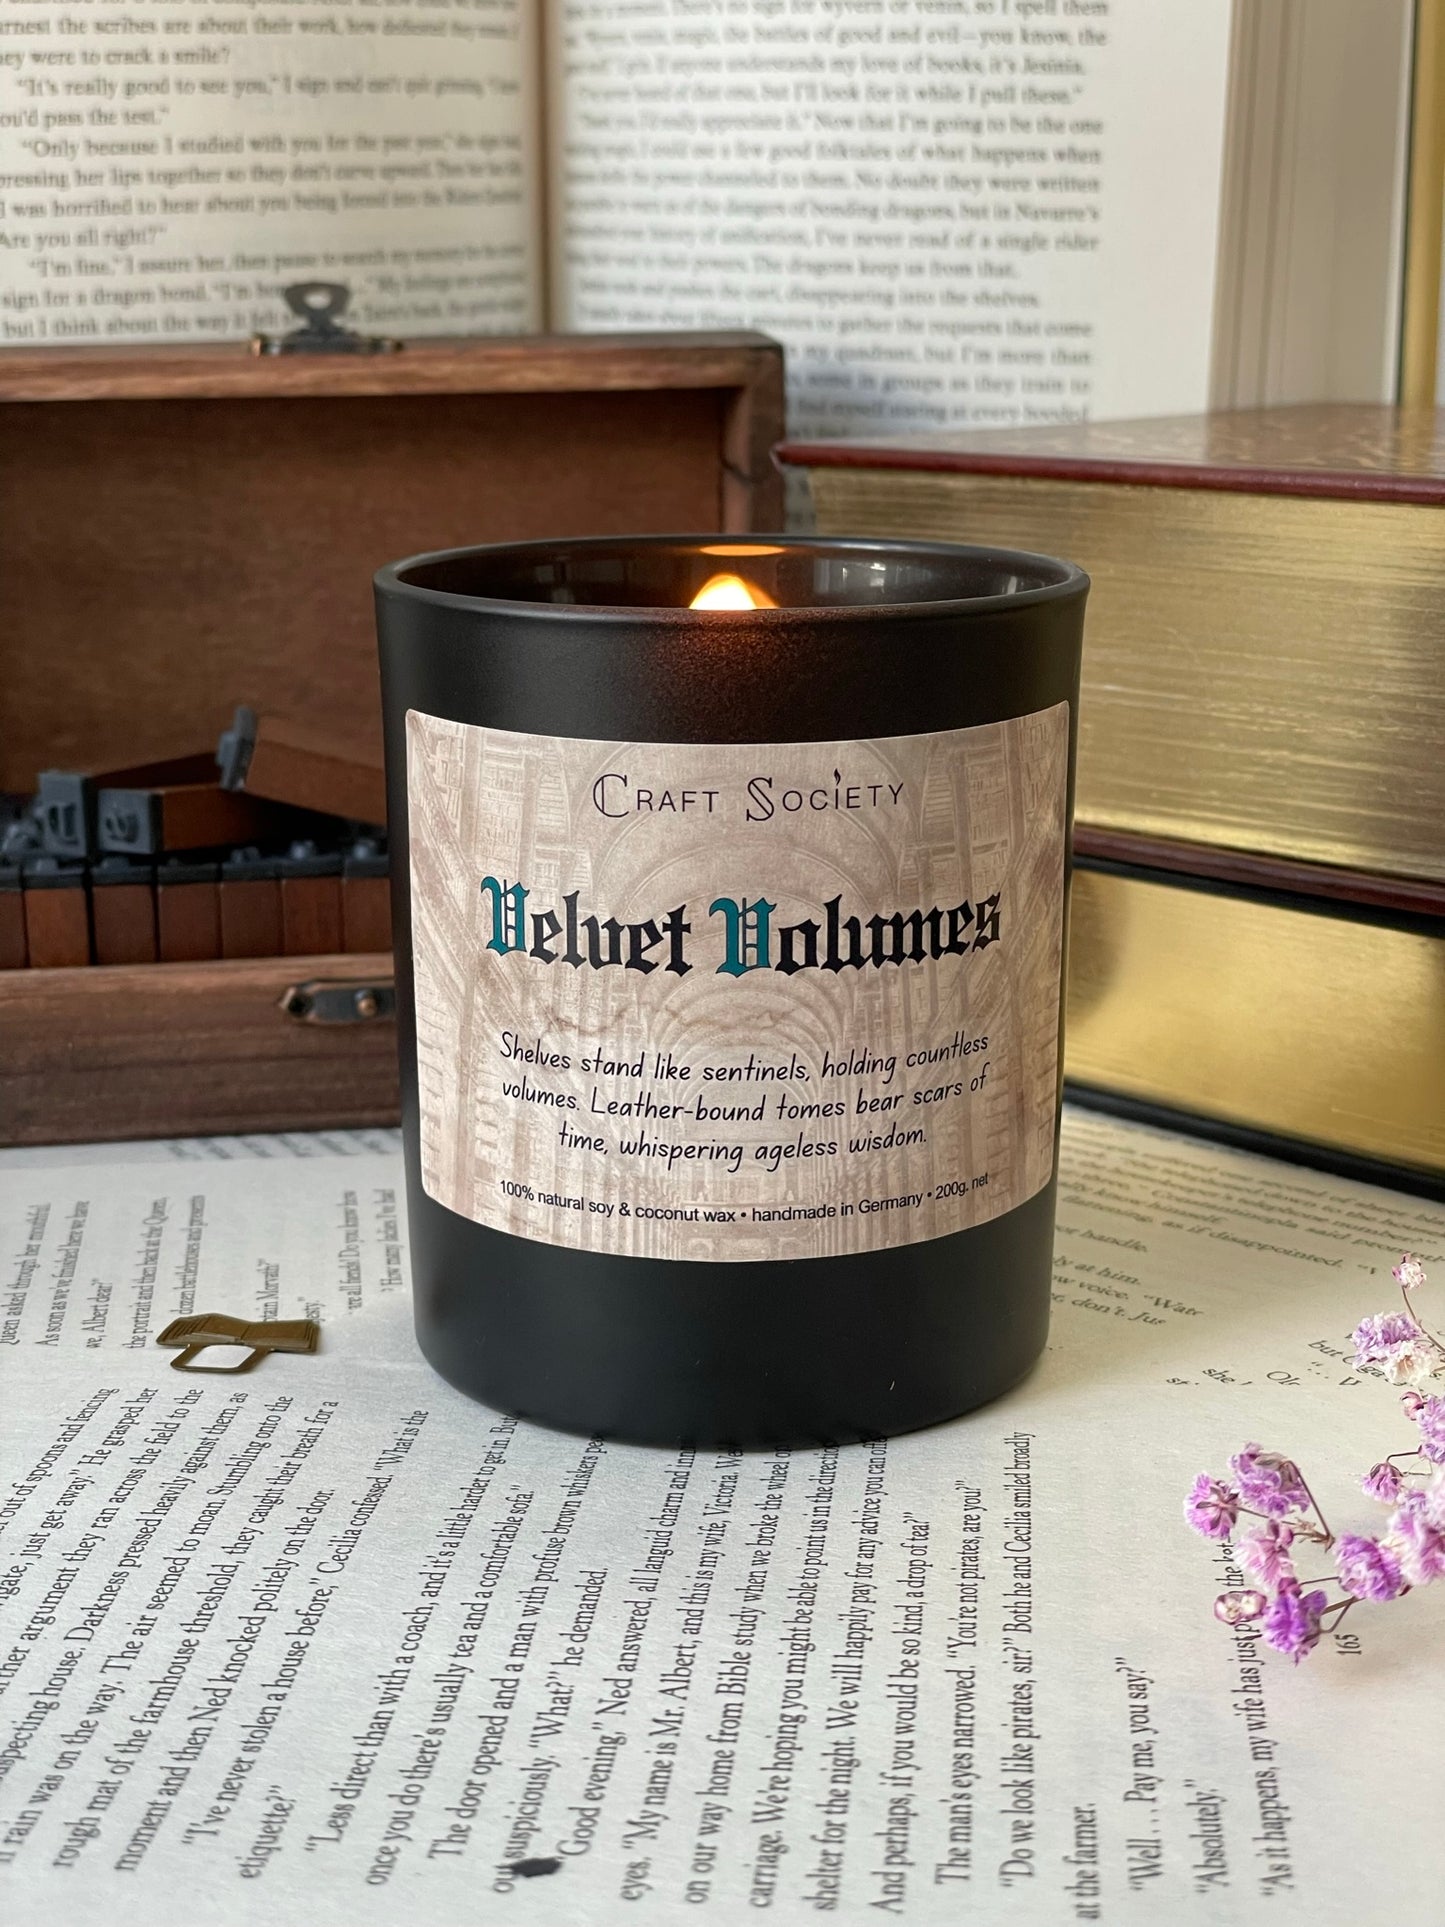 A burning deluxe scented candle in a black jar on a decorated background with books and texts